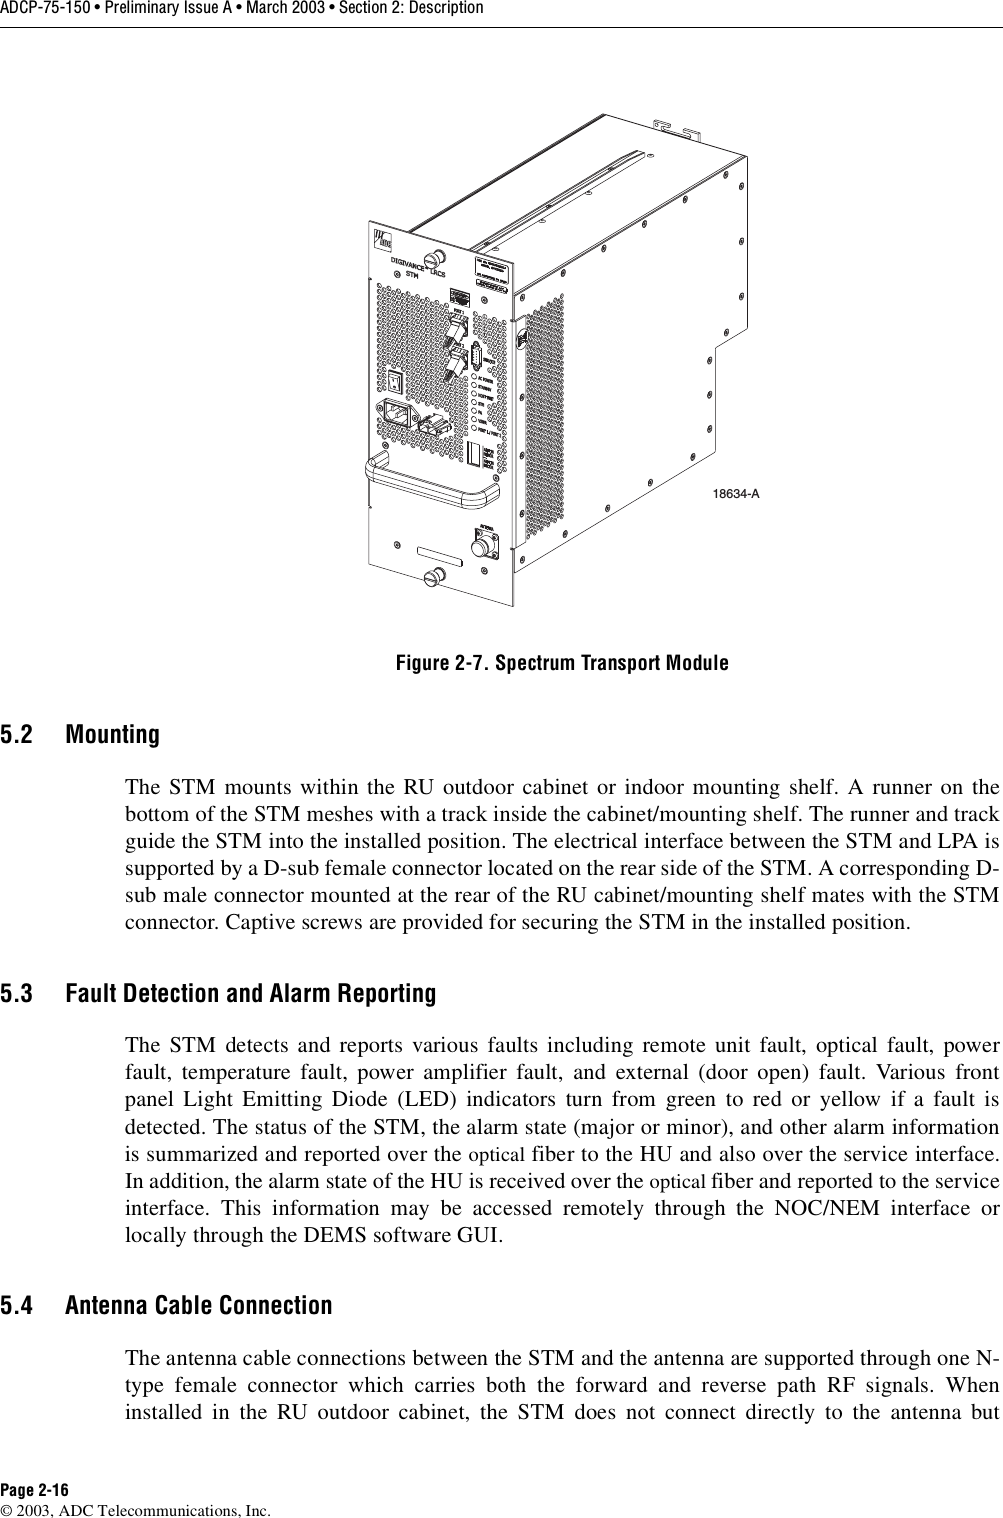 ADCP-75-150 • Preliminary Issue A • March 2003 • Section 2: DescriptionPage 2-16©2003, ADC Telecommunications, Inc.Figure 2-7. Spectrum Transport Module5.2 MountingThe STM mounts within the RU outdoor cabinet or indoor mounting shelf. Arunner on thebottom of the STM meshes with atrack inside the cabinet/mounting shelf. The runner and trackguide the STM into the installed position. The electrical interface between the STM and LPA issupported by aD-sub female connector located on the rear side of the STM. Acorresponding D-sub male connector mounted at the rear of the RU cabinet/mounting shelf mates with the STMconnector. Captive screws are provided for securing the STM in the installed position.5.3 Fault Detection and Alarm ReportingThe STM detects and reports various faults including remote unit fault, optical fault, powerfault, temperature fault, power amplifier fault, and external (door open) fault. Various frontpanel Light Emitting Diode (LED) indicators turn from green to red or yellow if afault isdetected. The status of the STM, the alarm state (major or minor), and other alarm informationis summarized and reported over the optical fiber to the HU and also over the service interface.In addition, the alarm state of the HU is received over the optical fiber and reported to the serviceinterface. This information may be accessed remotely through the NOC/NEM interface orlocally through the DEMS software GUI.5.4 Antenna Cable ConnectionThe antenna cable connections between the STM and the antenna are supported through one N-type female connector which carries both the forward and reverse path RF signals. Wheninstalled in the RU outdoor cabinet, the STM does not connect directly to the antenna but18634-A